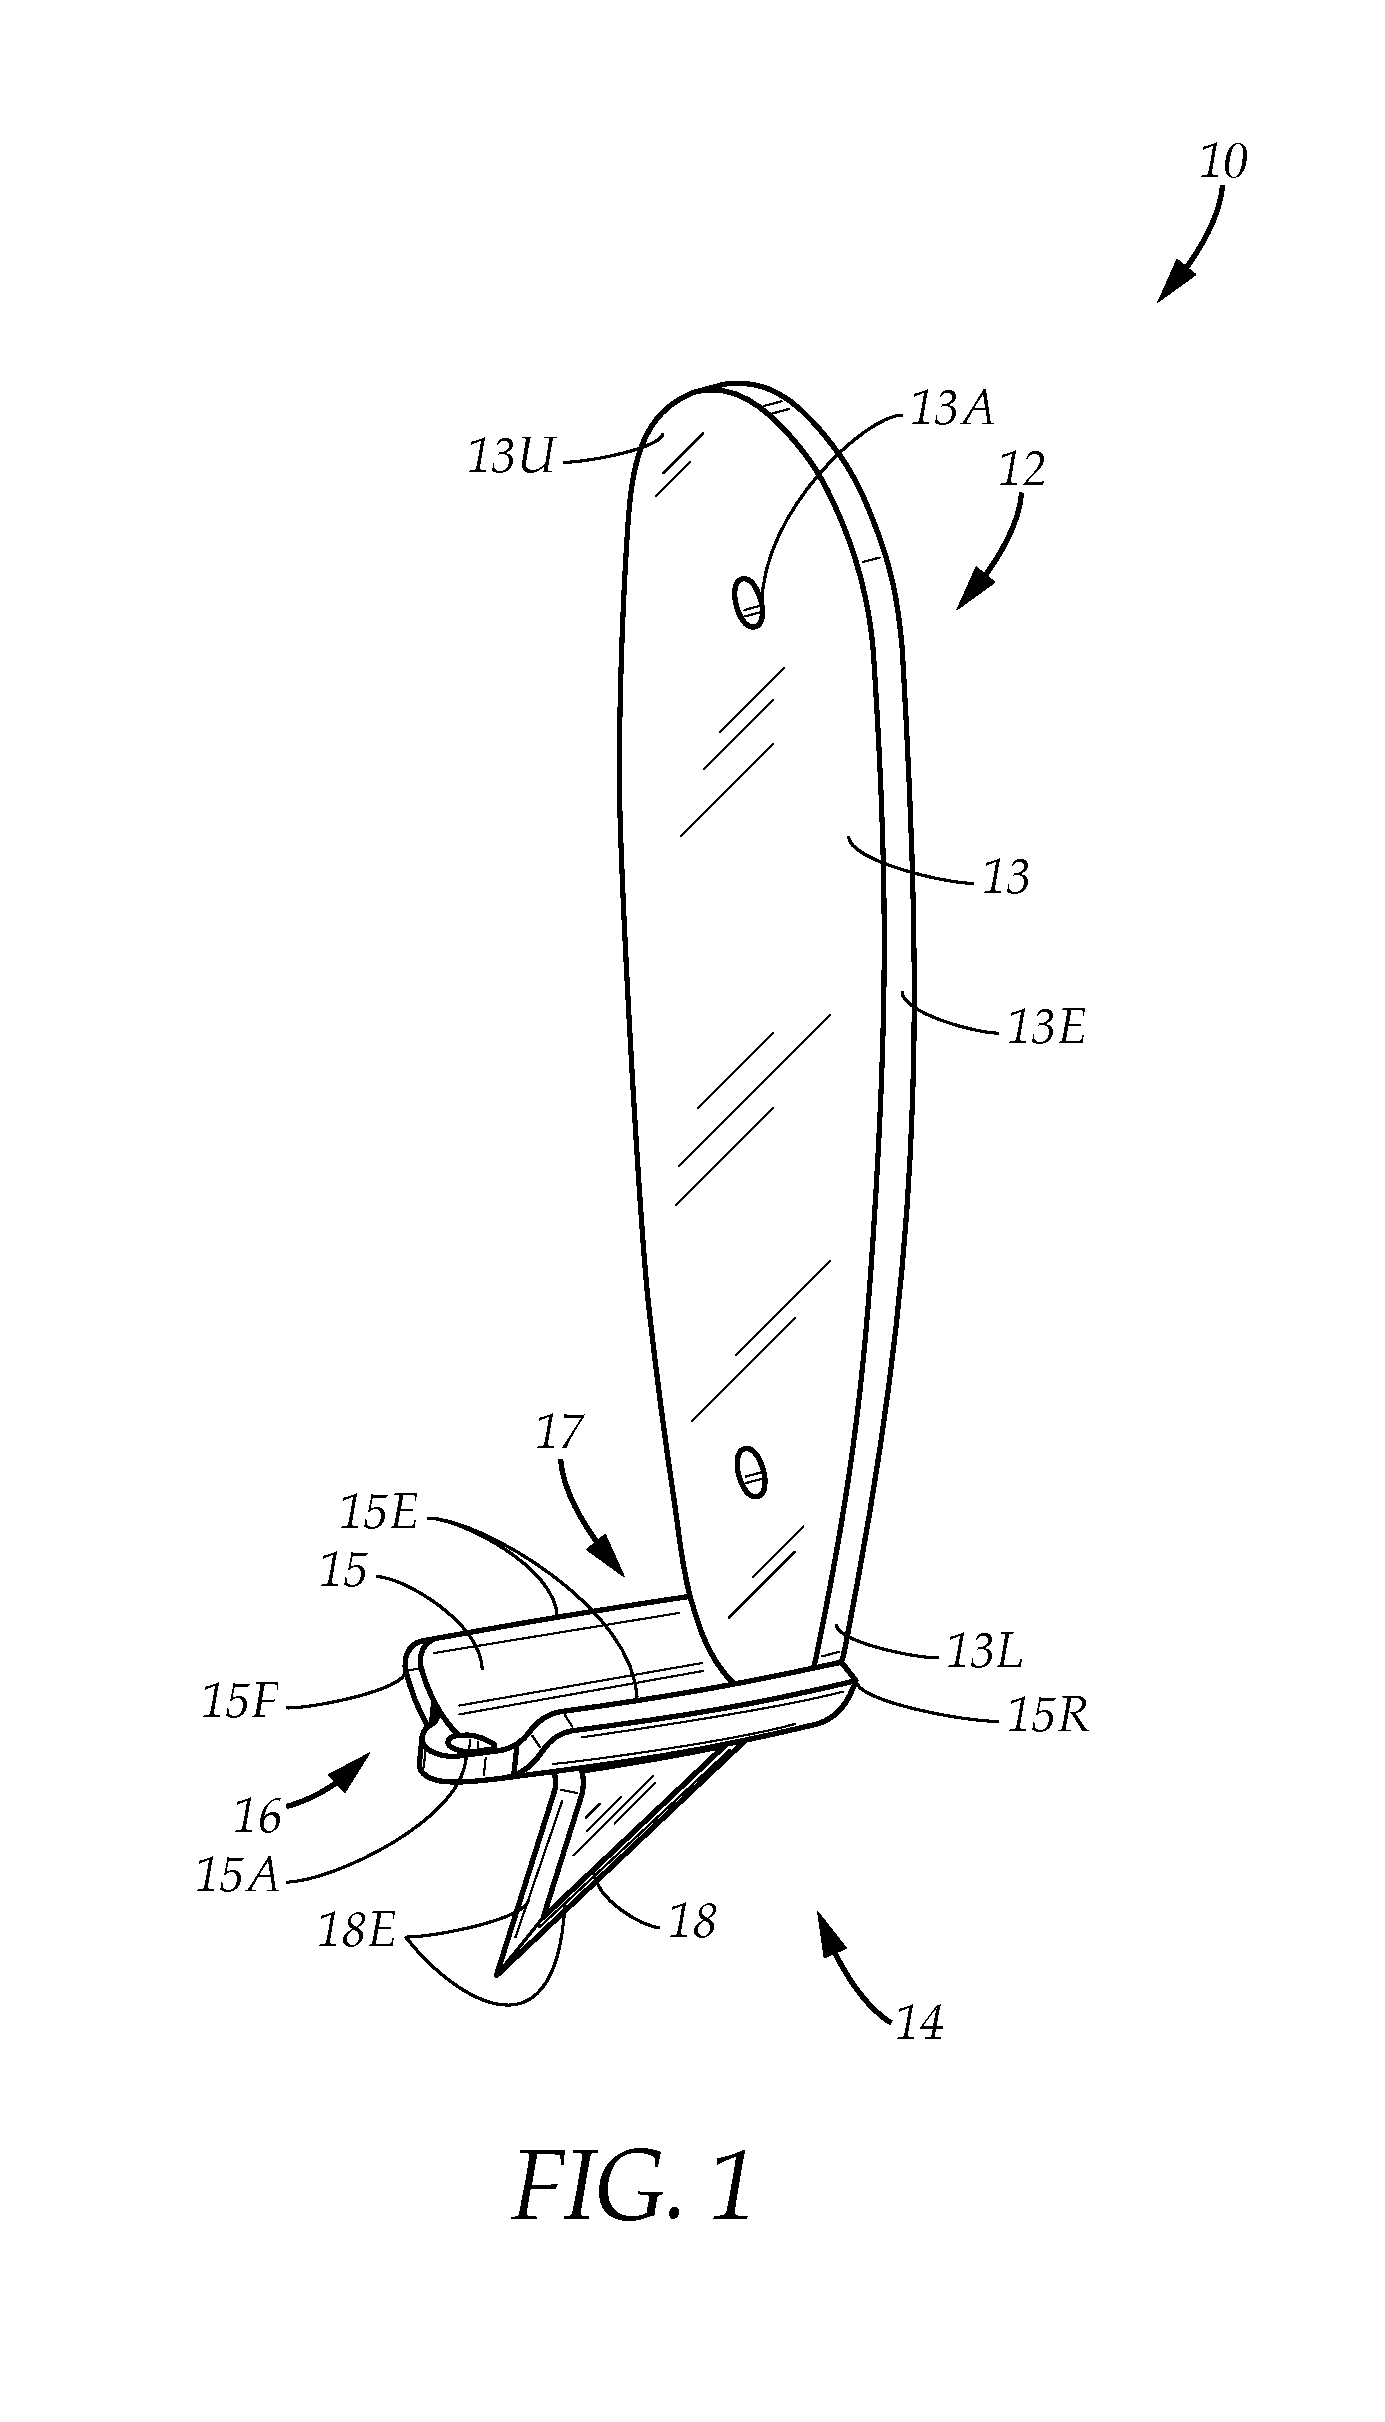 Blade attachment for firearms